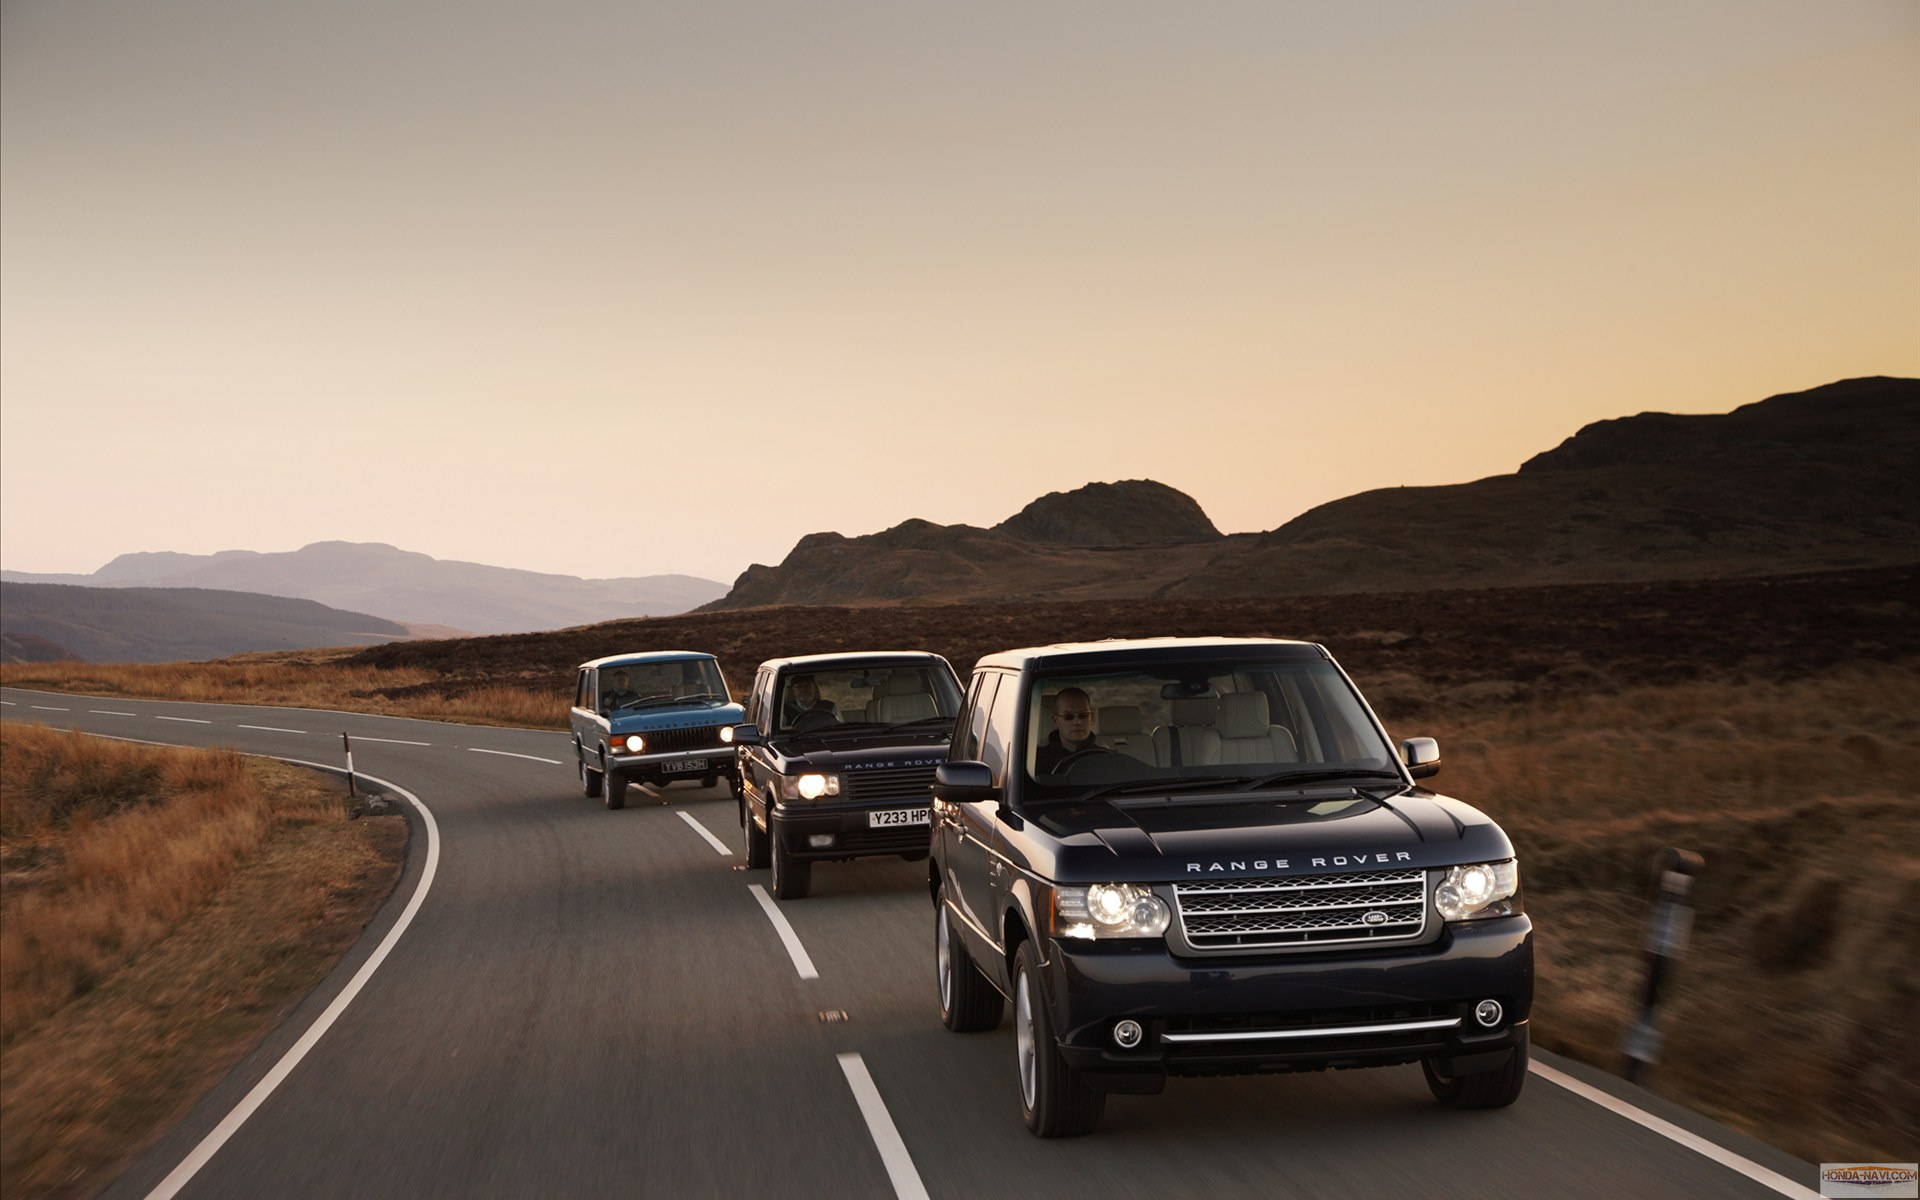 Land Rover Backgrounds 39071 2560x1600 px